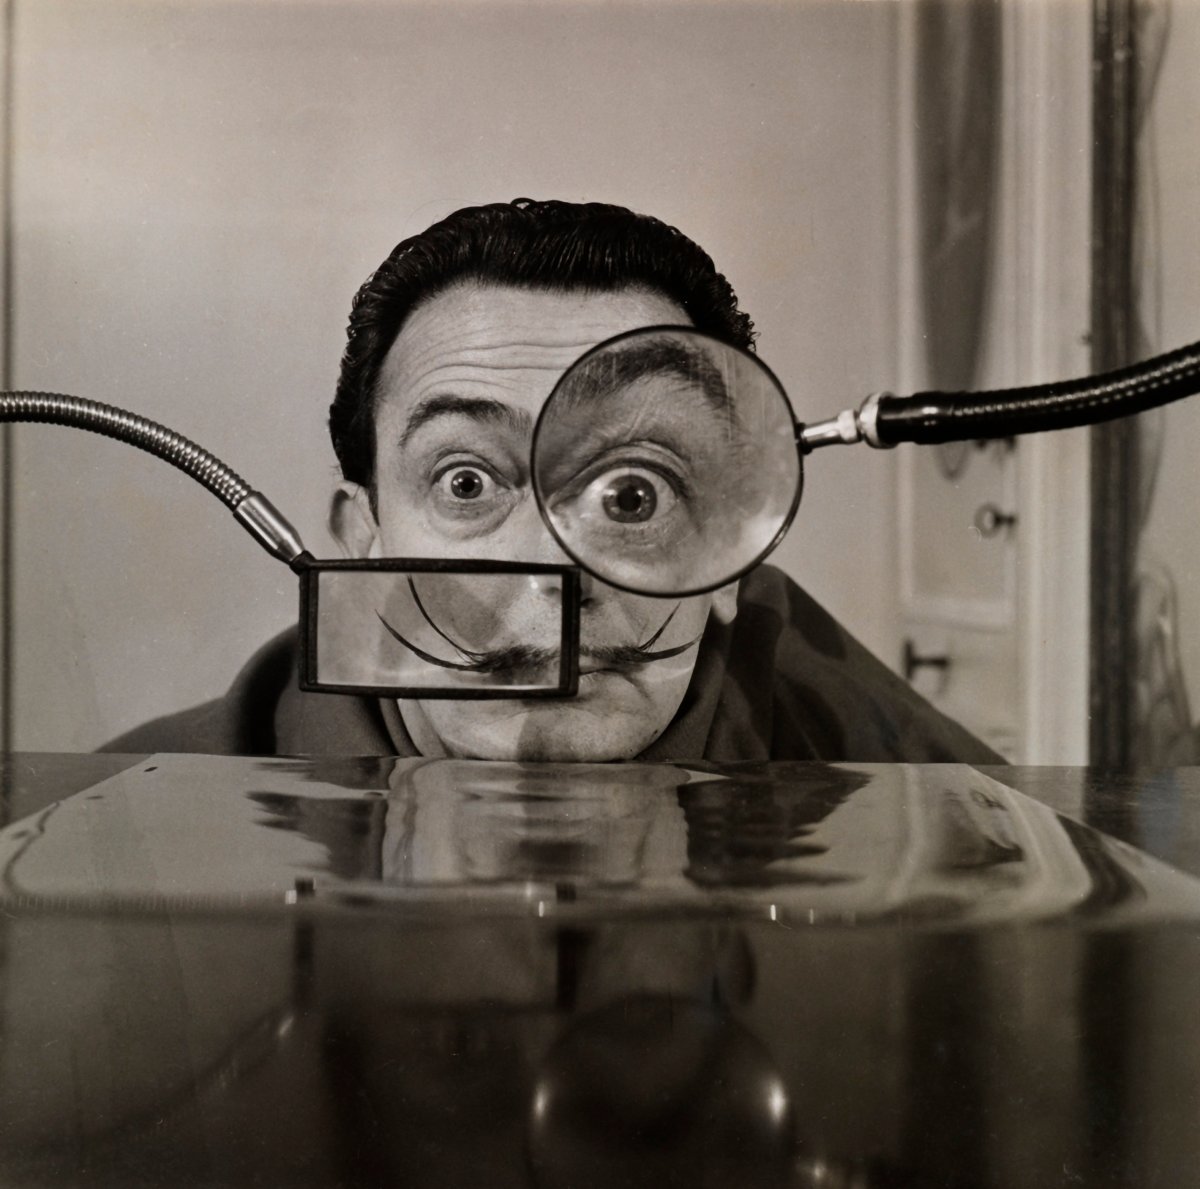 Peek inside the minds of Disney and Dali in ‘Architects of the Imagination’